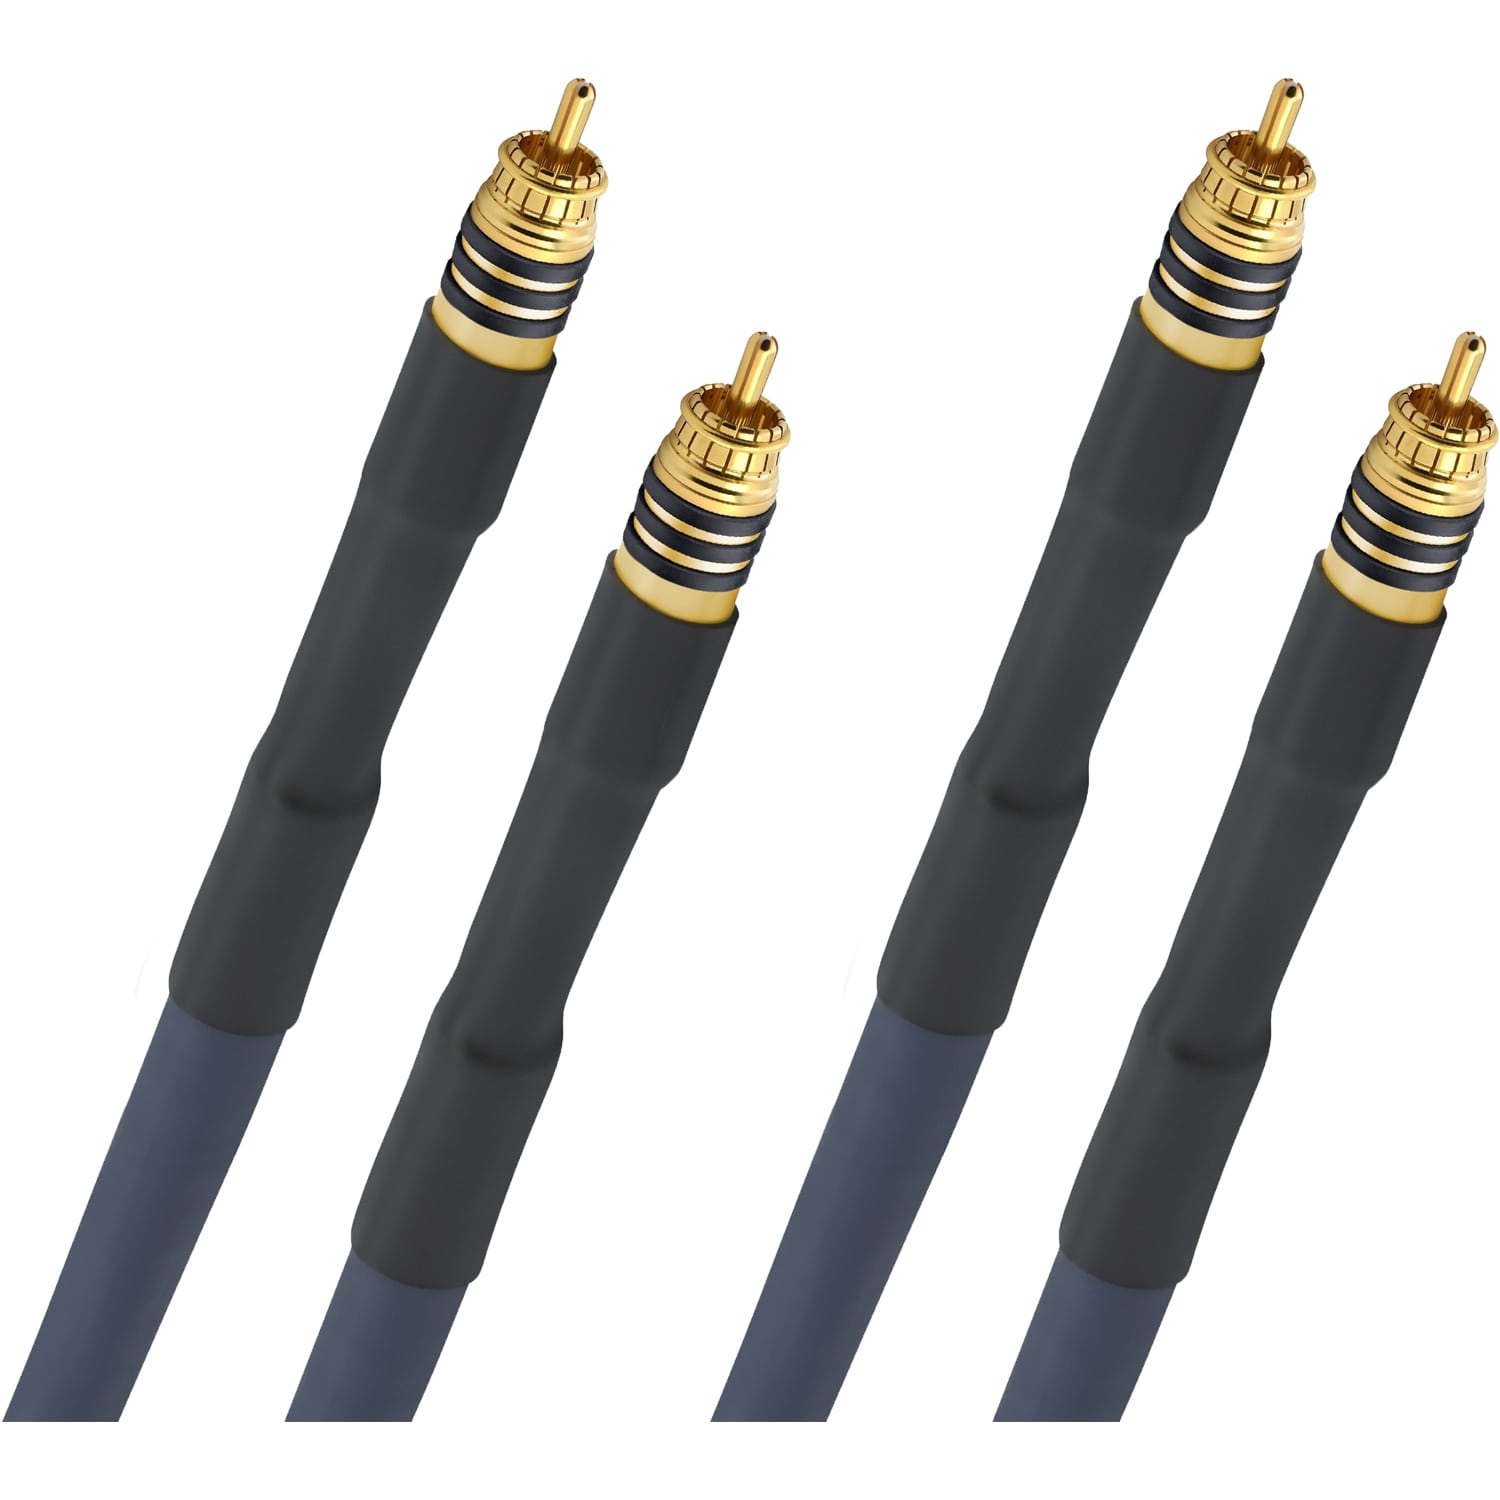 Кабели межблочные аудио Oehlbach STATE OF THE ART XXL Cable RCA, 2x1,25m, gold, D1C13113 кабели межблочные аудио oehlbach state of the art xxl cable xlr 2x1 50m gold d1c13134